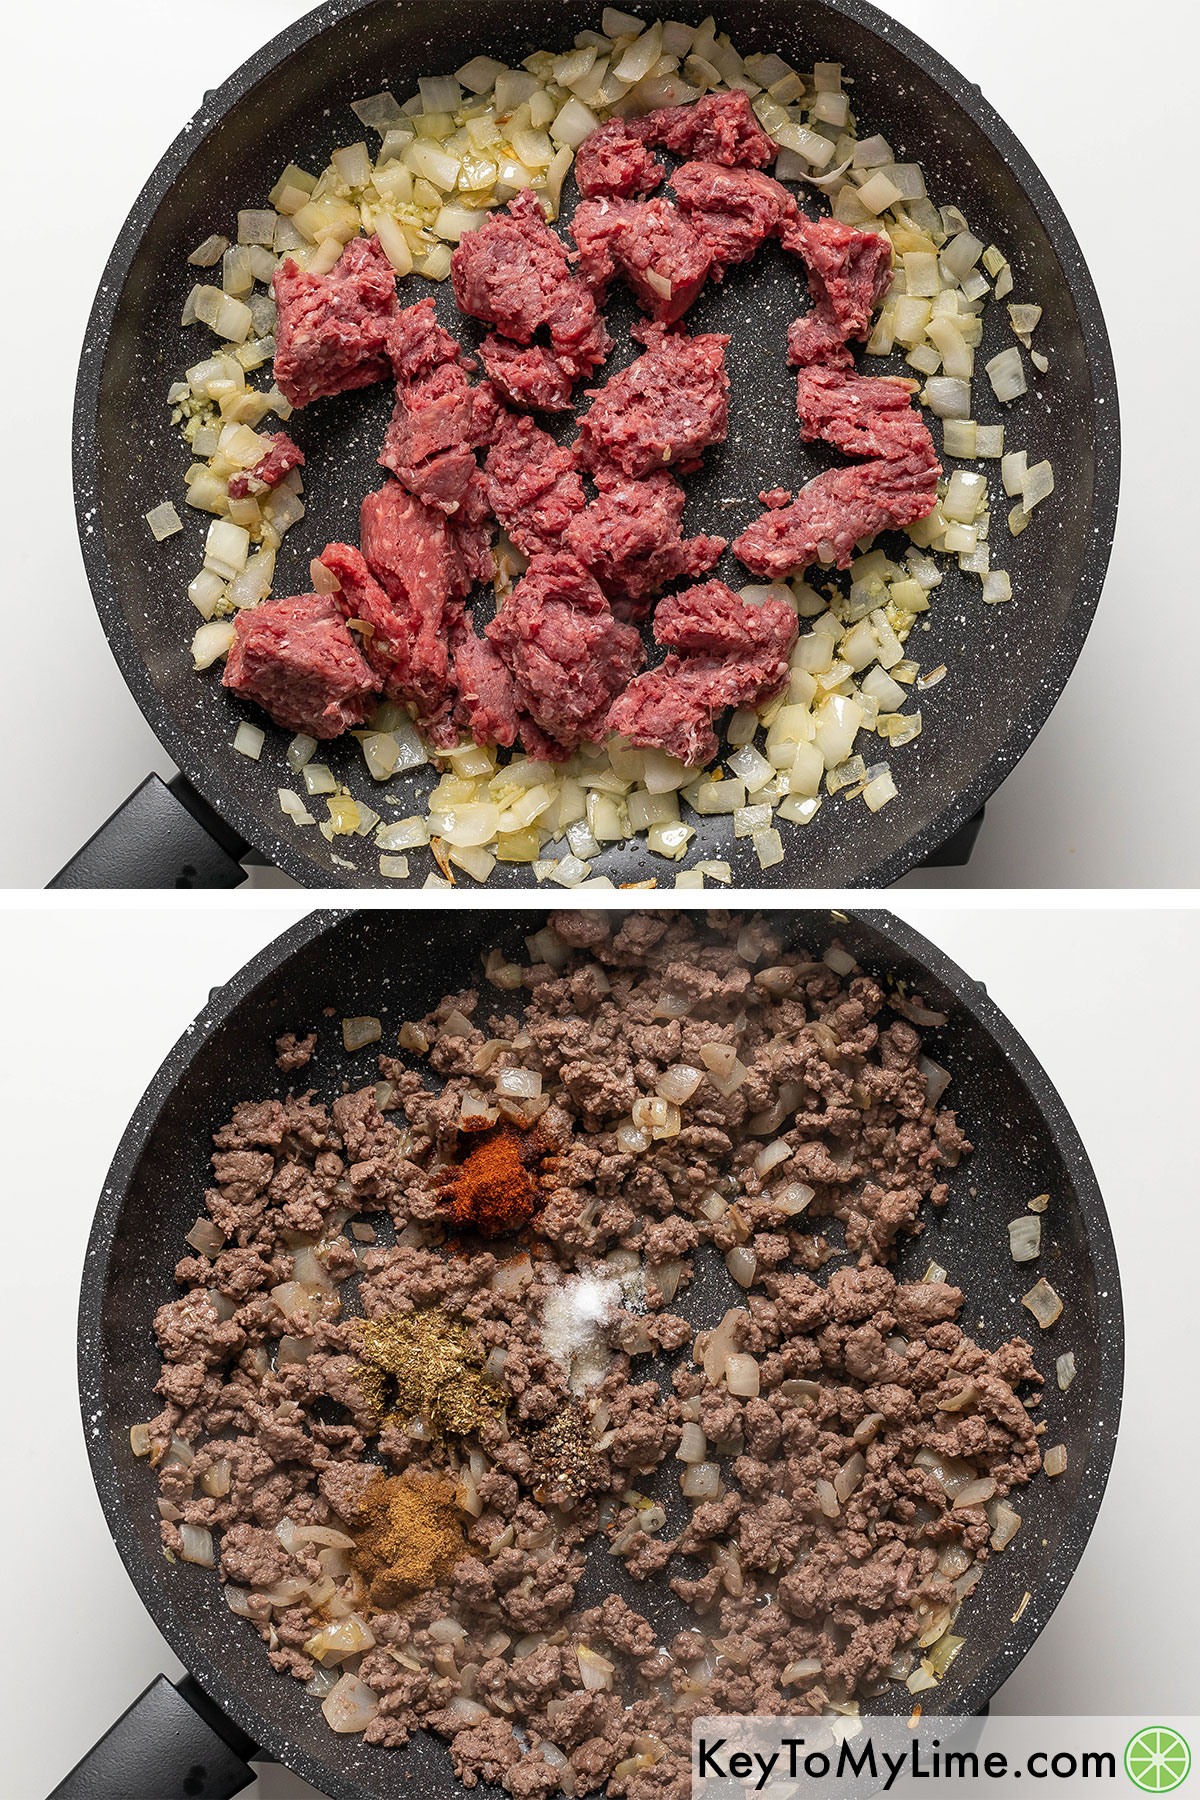 Browning ground beef in a skillet with spices.